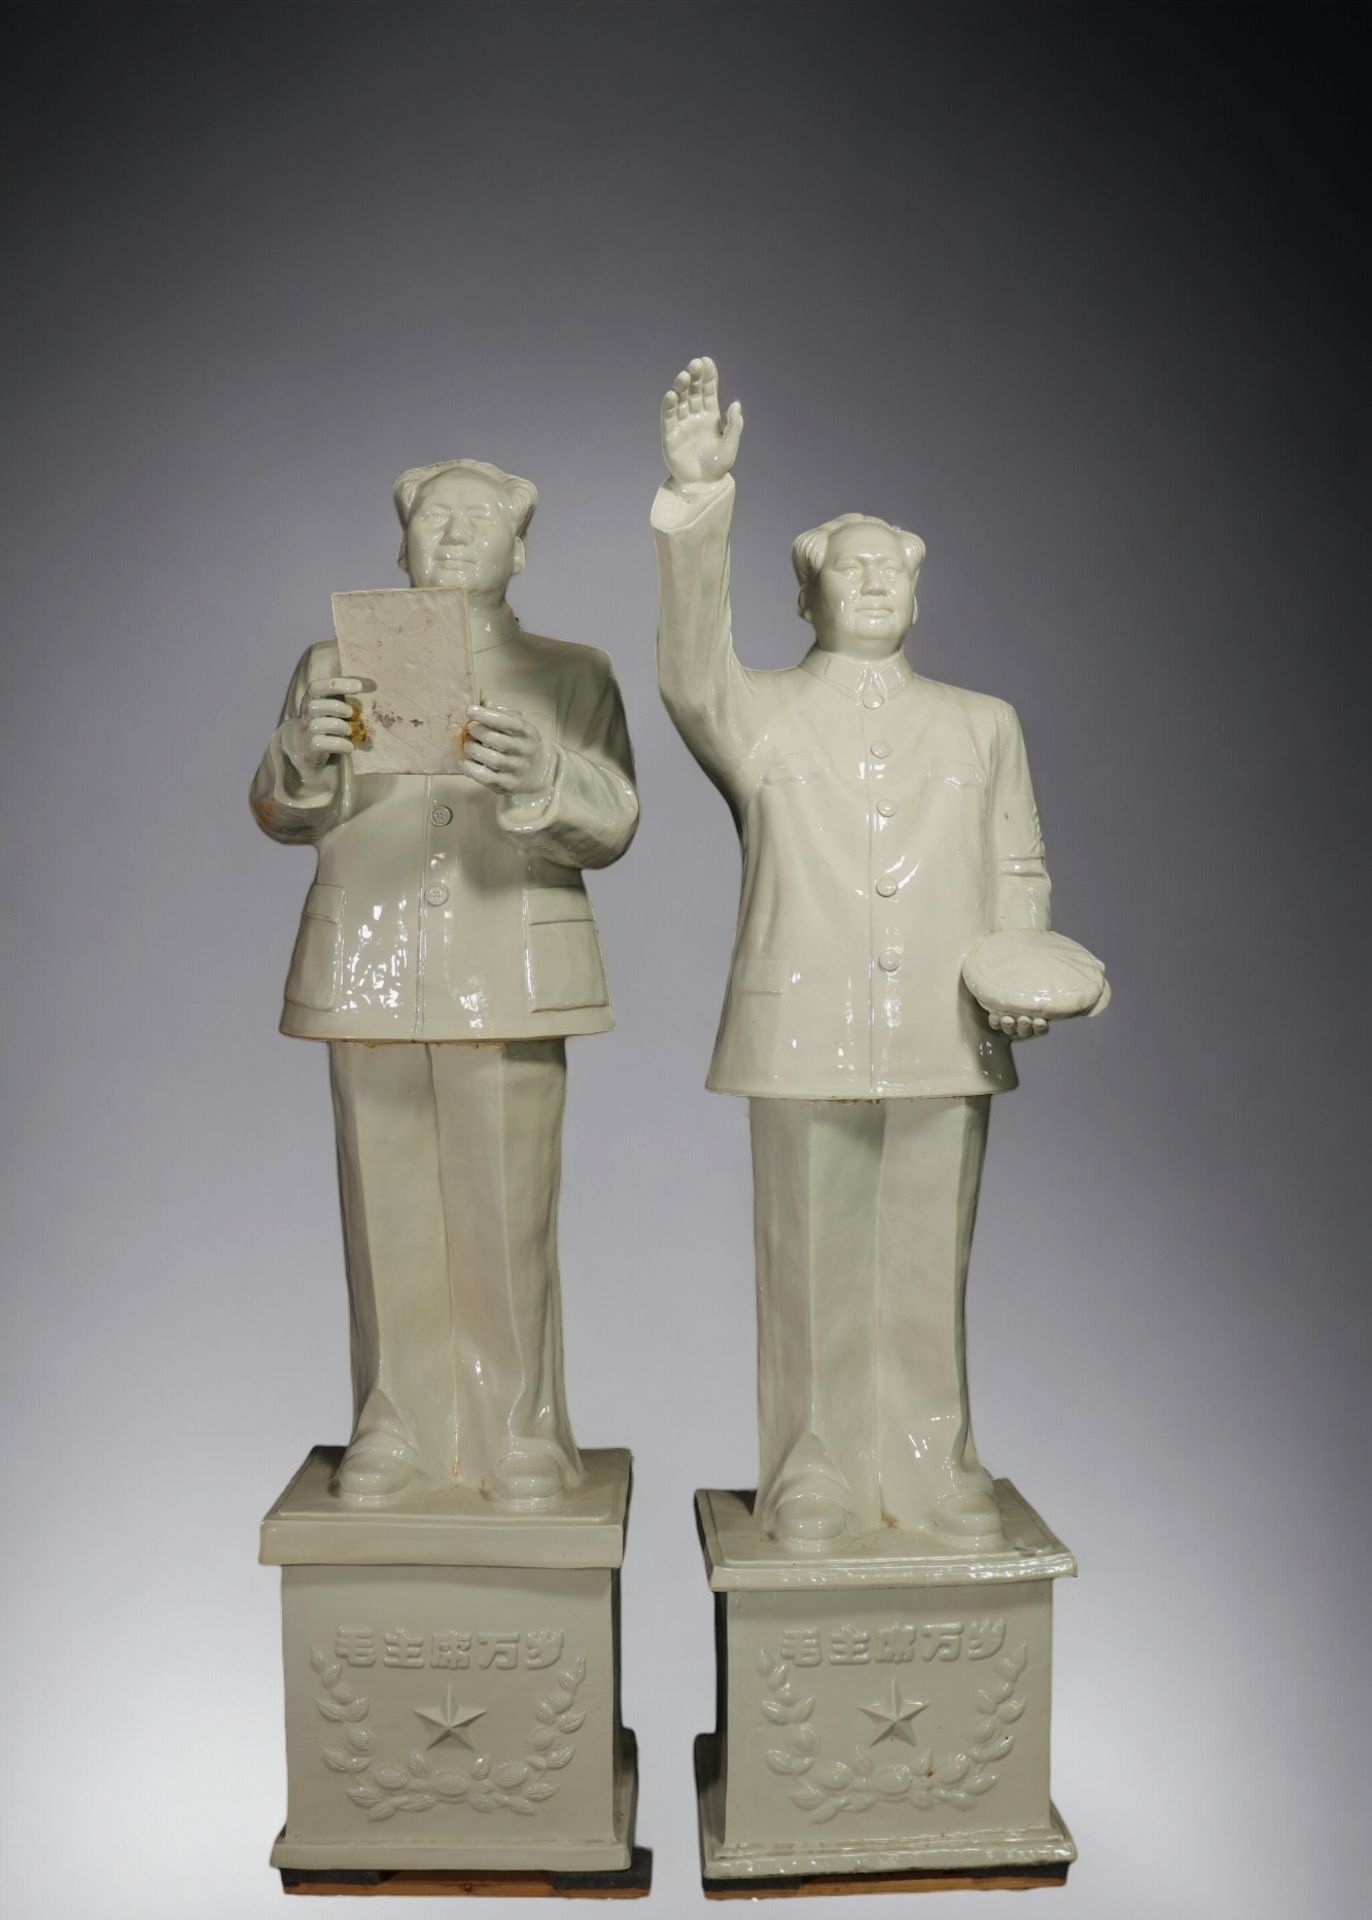 China - Imposing pair of white enamelled porcelain statues of Mao Zedong, Republic period.